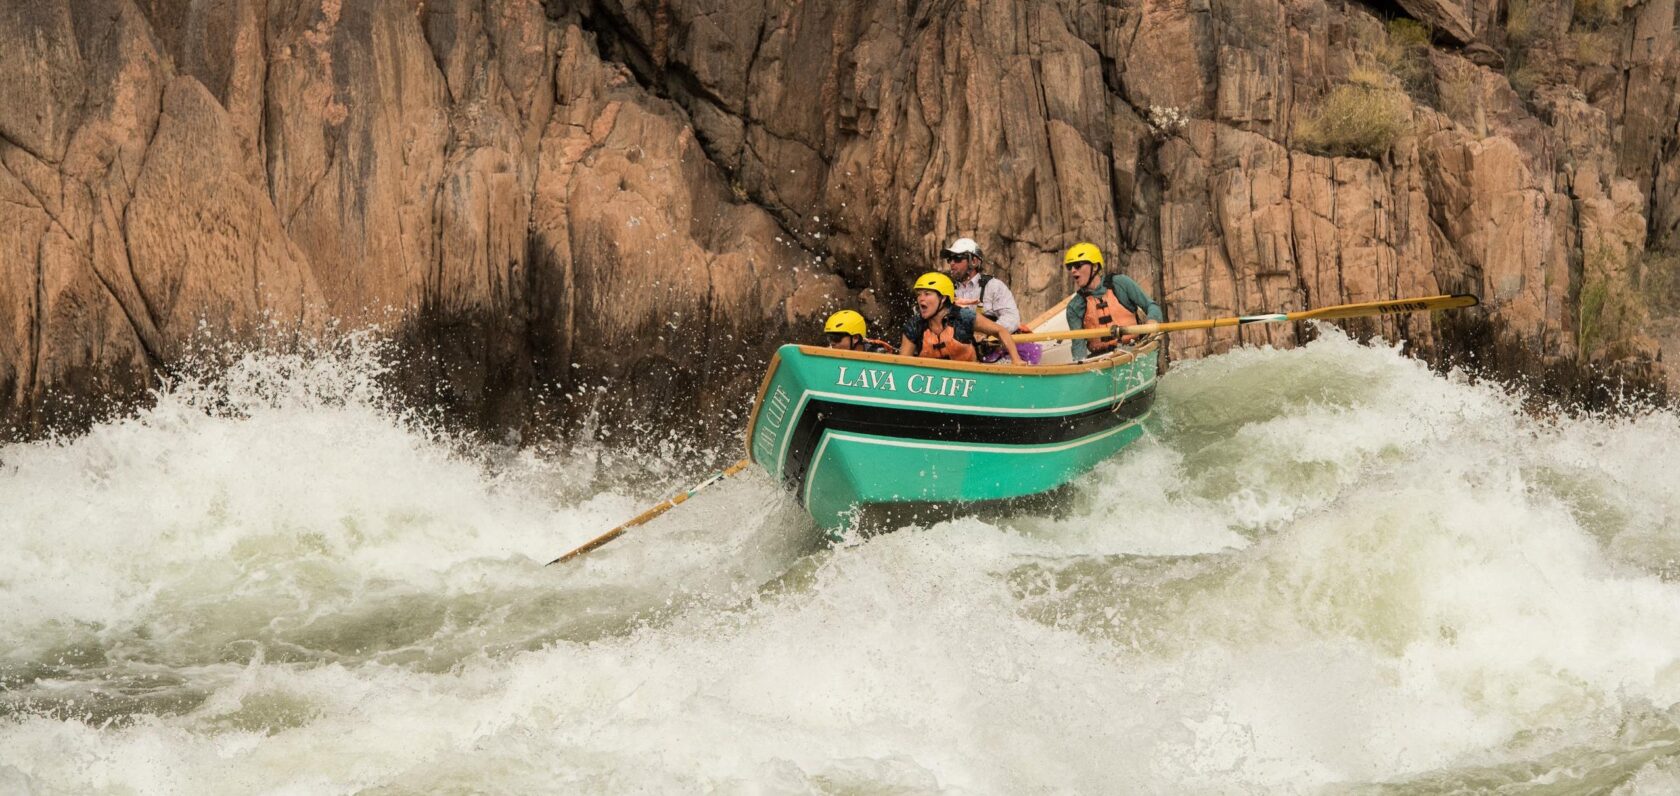 Passengers in a dory make it through a rapid on the Colorado River through Grand Canyon.